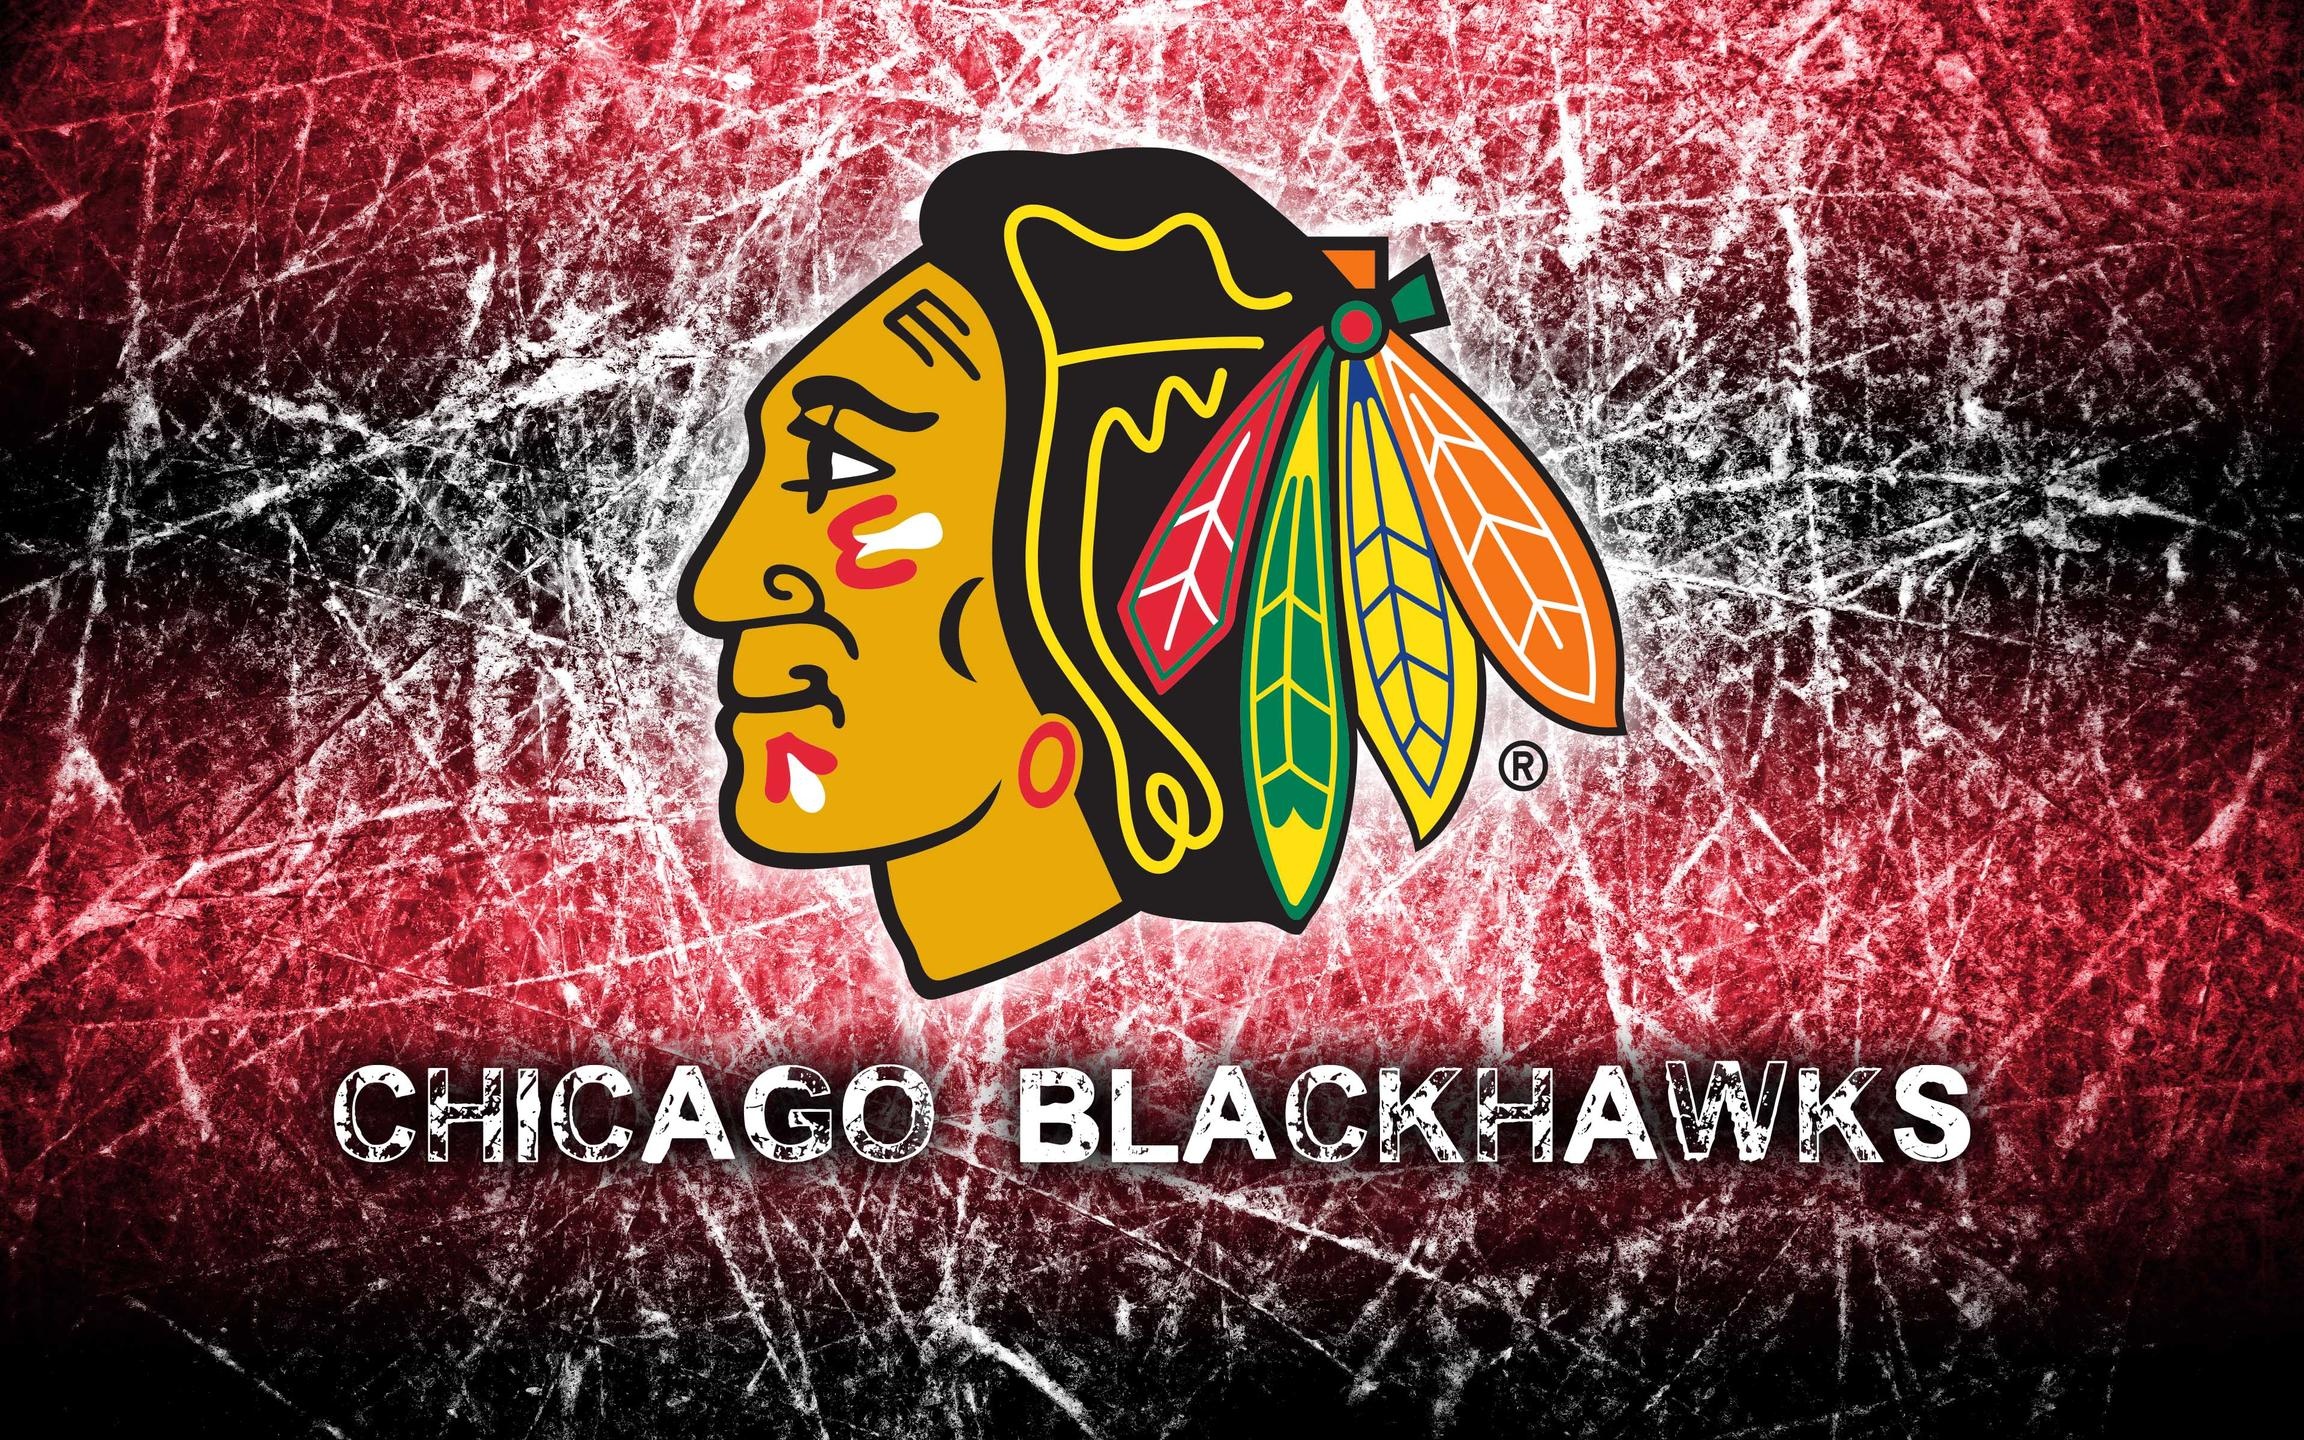 Chicago Blackhawks: Six-time Stanley Cup champions: 2015, 2013, 2010, 1961, 1938, 1934. 2310x1440 HD Wallpaper.